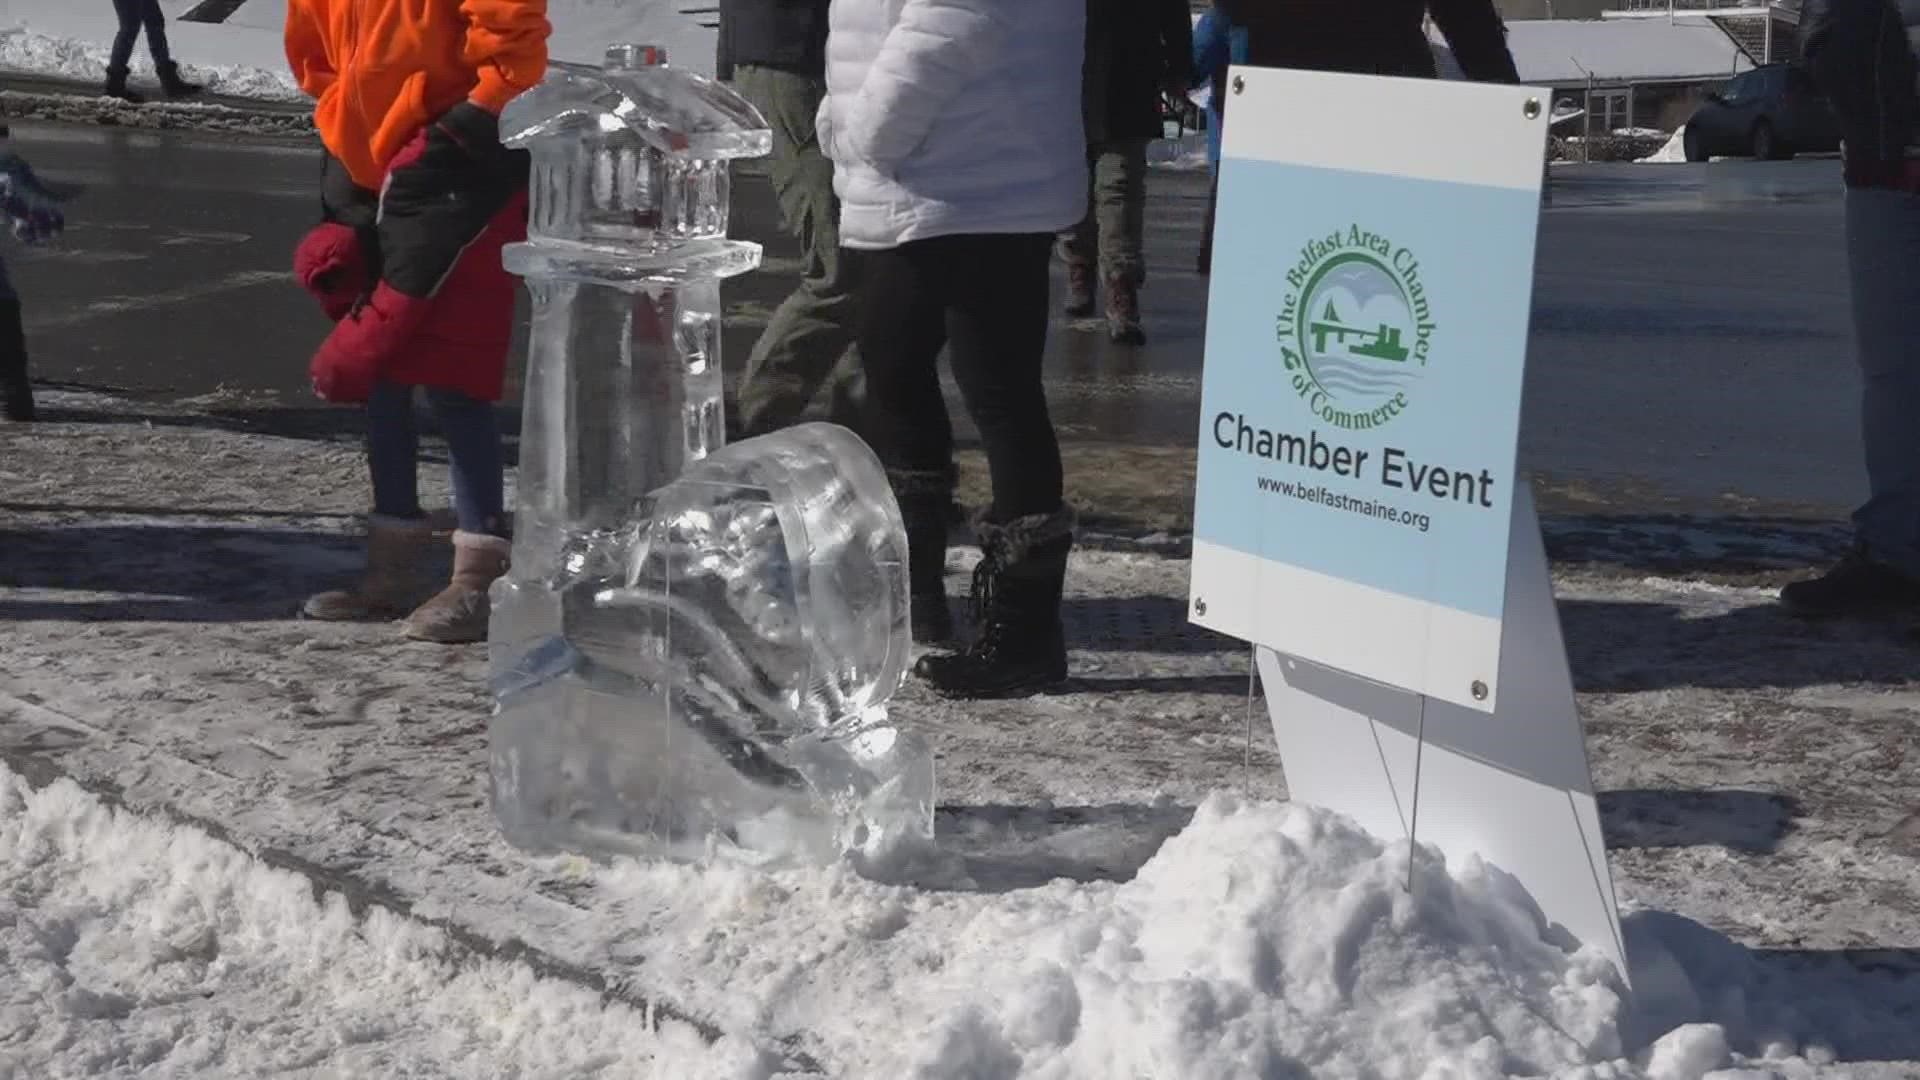 Organizers said this year's event is bigger and better than last year, including more ice sculptures and businesses participating.